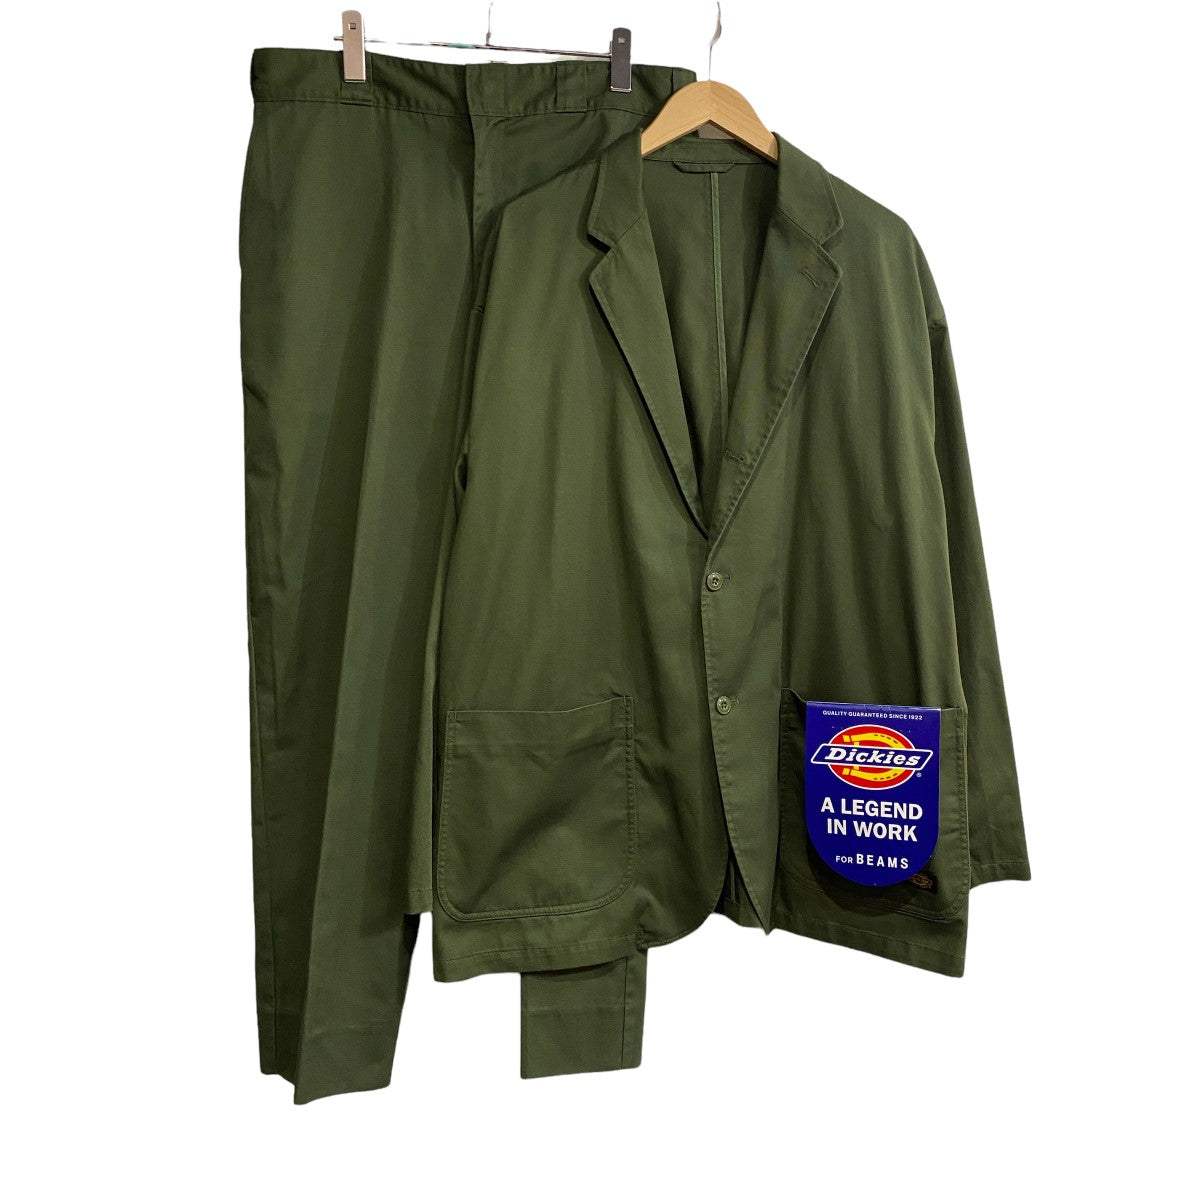 BEAMS×TRIPSTER×Dickies 21SS OLIVE SUIT セットアップスーツ オリーブ 